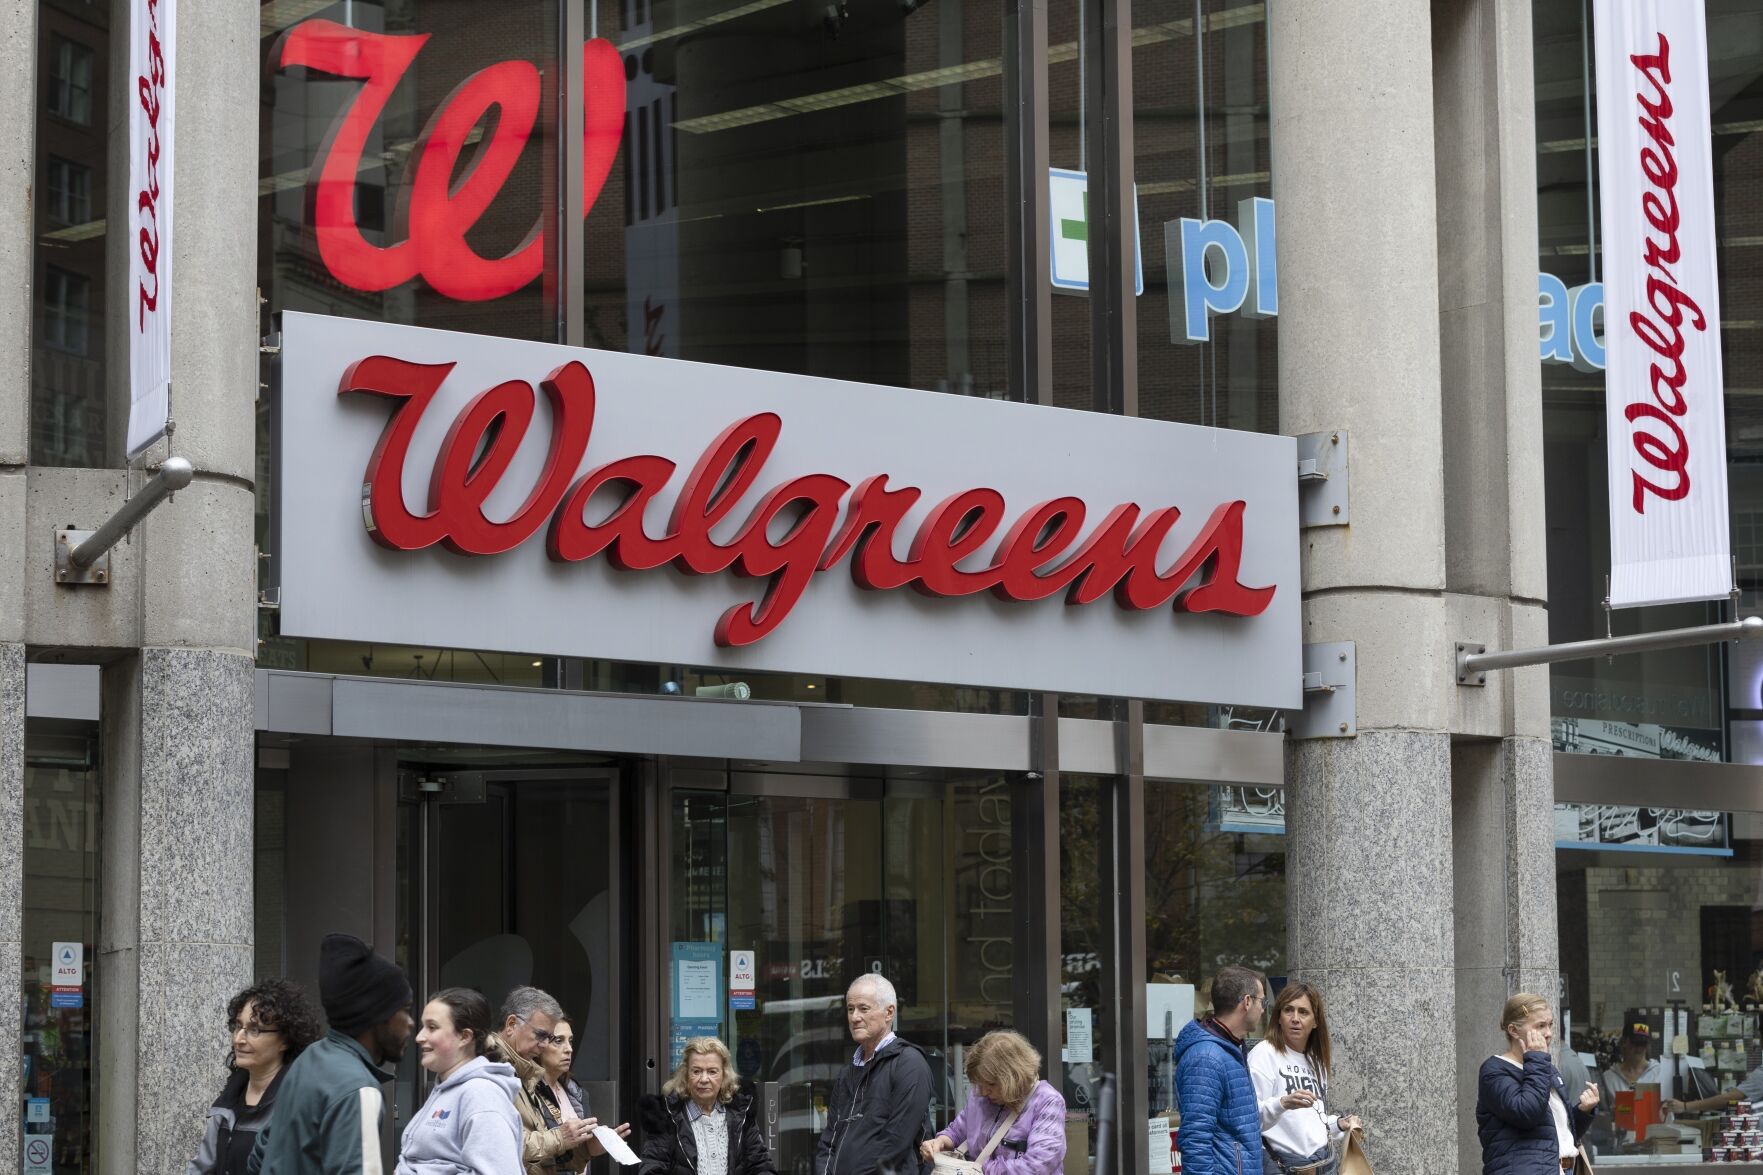 <p>FILE - The entrance to a Walgreens is seen on Oct. 14, 2022, in Boston. A decline in COVID-19 vaccinations and another opioid settlement cut into Walgreens second-quarter earnings, but the drugstore chain still delivered better-than-expected results. Walgreens said Tuesday, March 28, 2023, that it recorded 2.4 million vaccinations in its recently completed fiscal second quarter. (AP Photo/Michael Dwyer, File)</p>   PHOTO CREDIT: Michael Dwyer